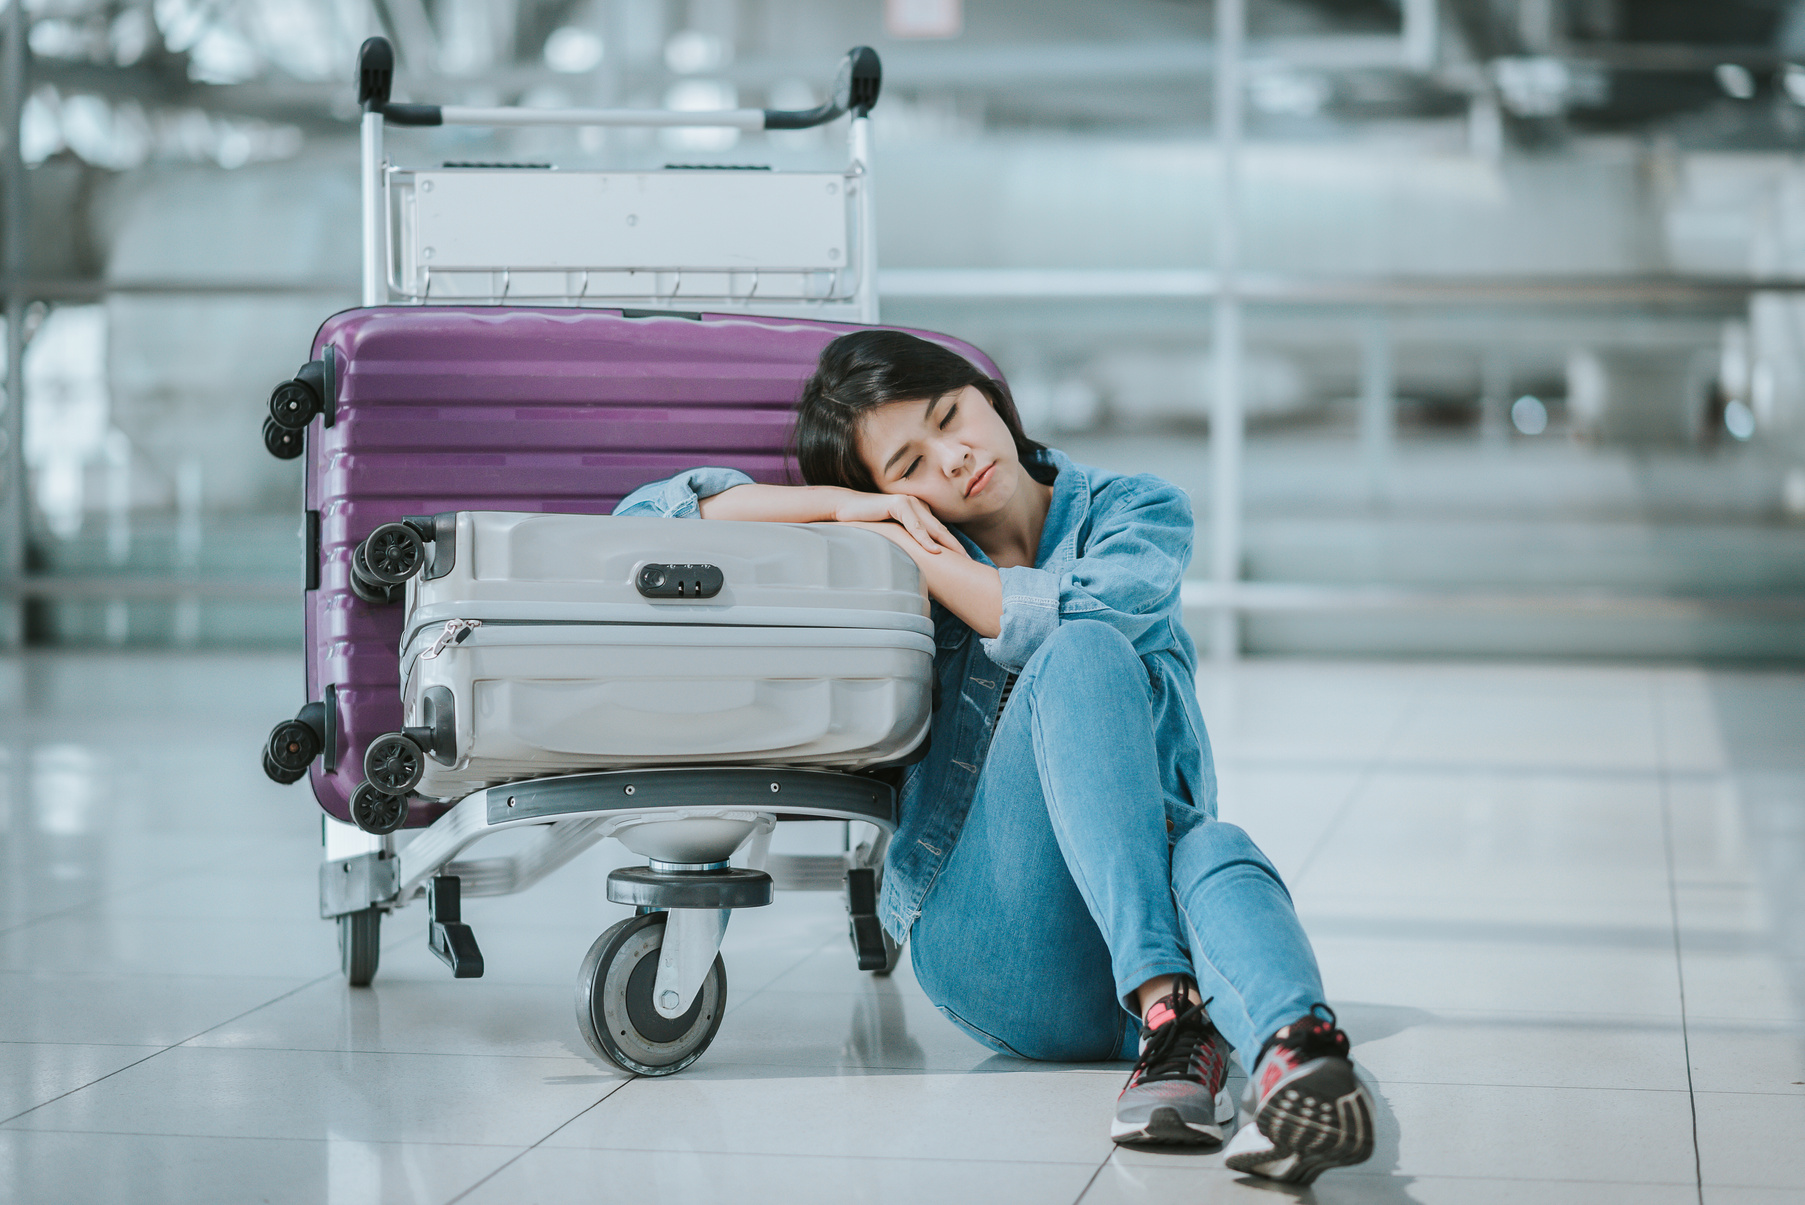 Woman Sleeping with Luggage Trolley at Airport